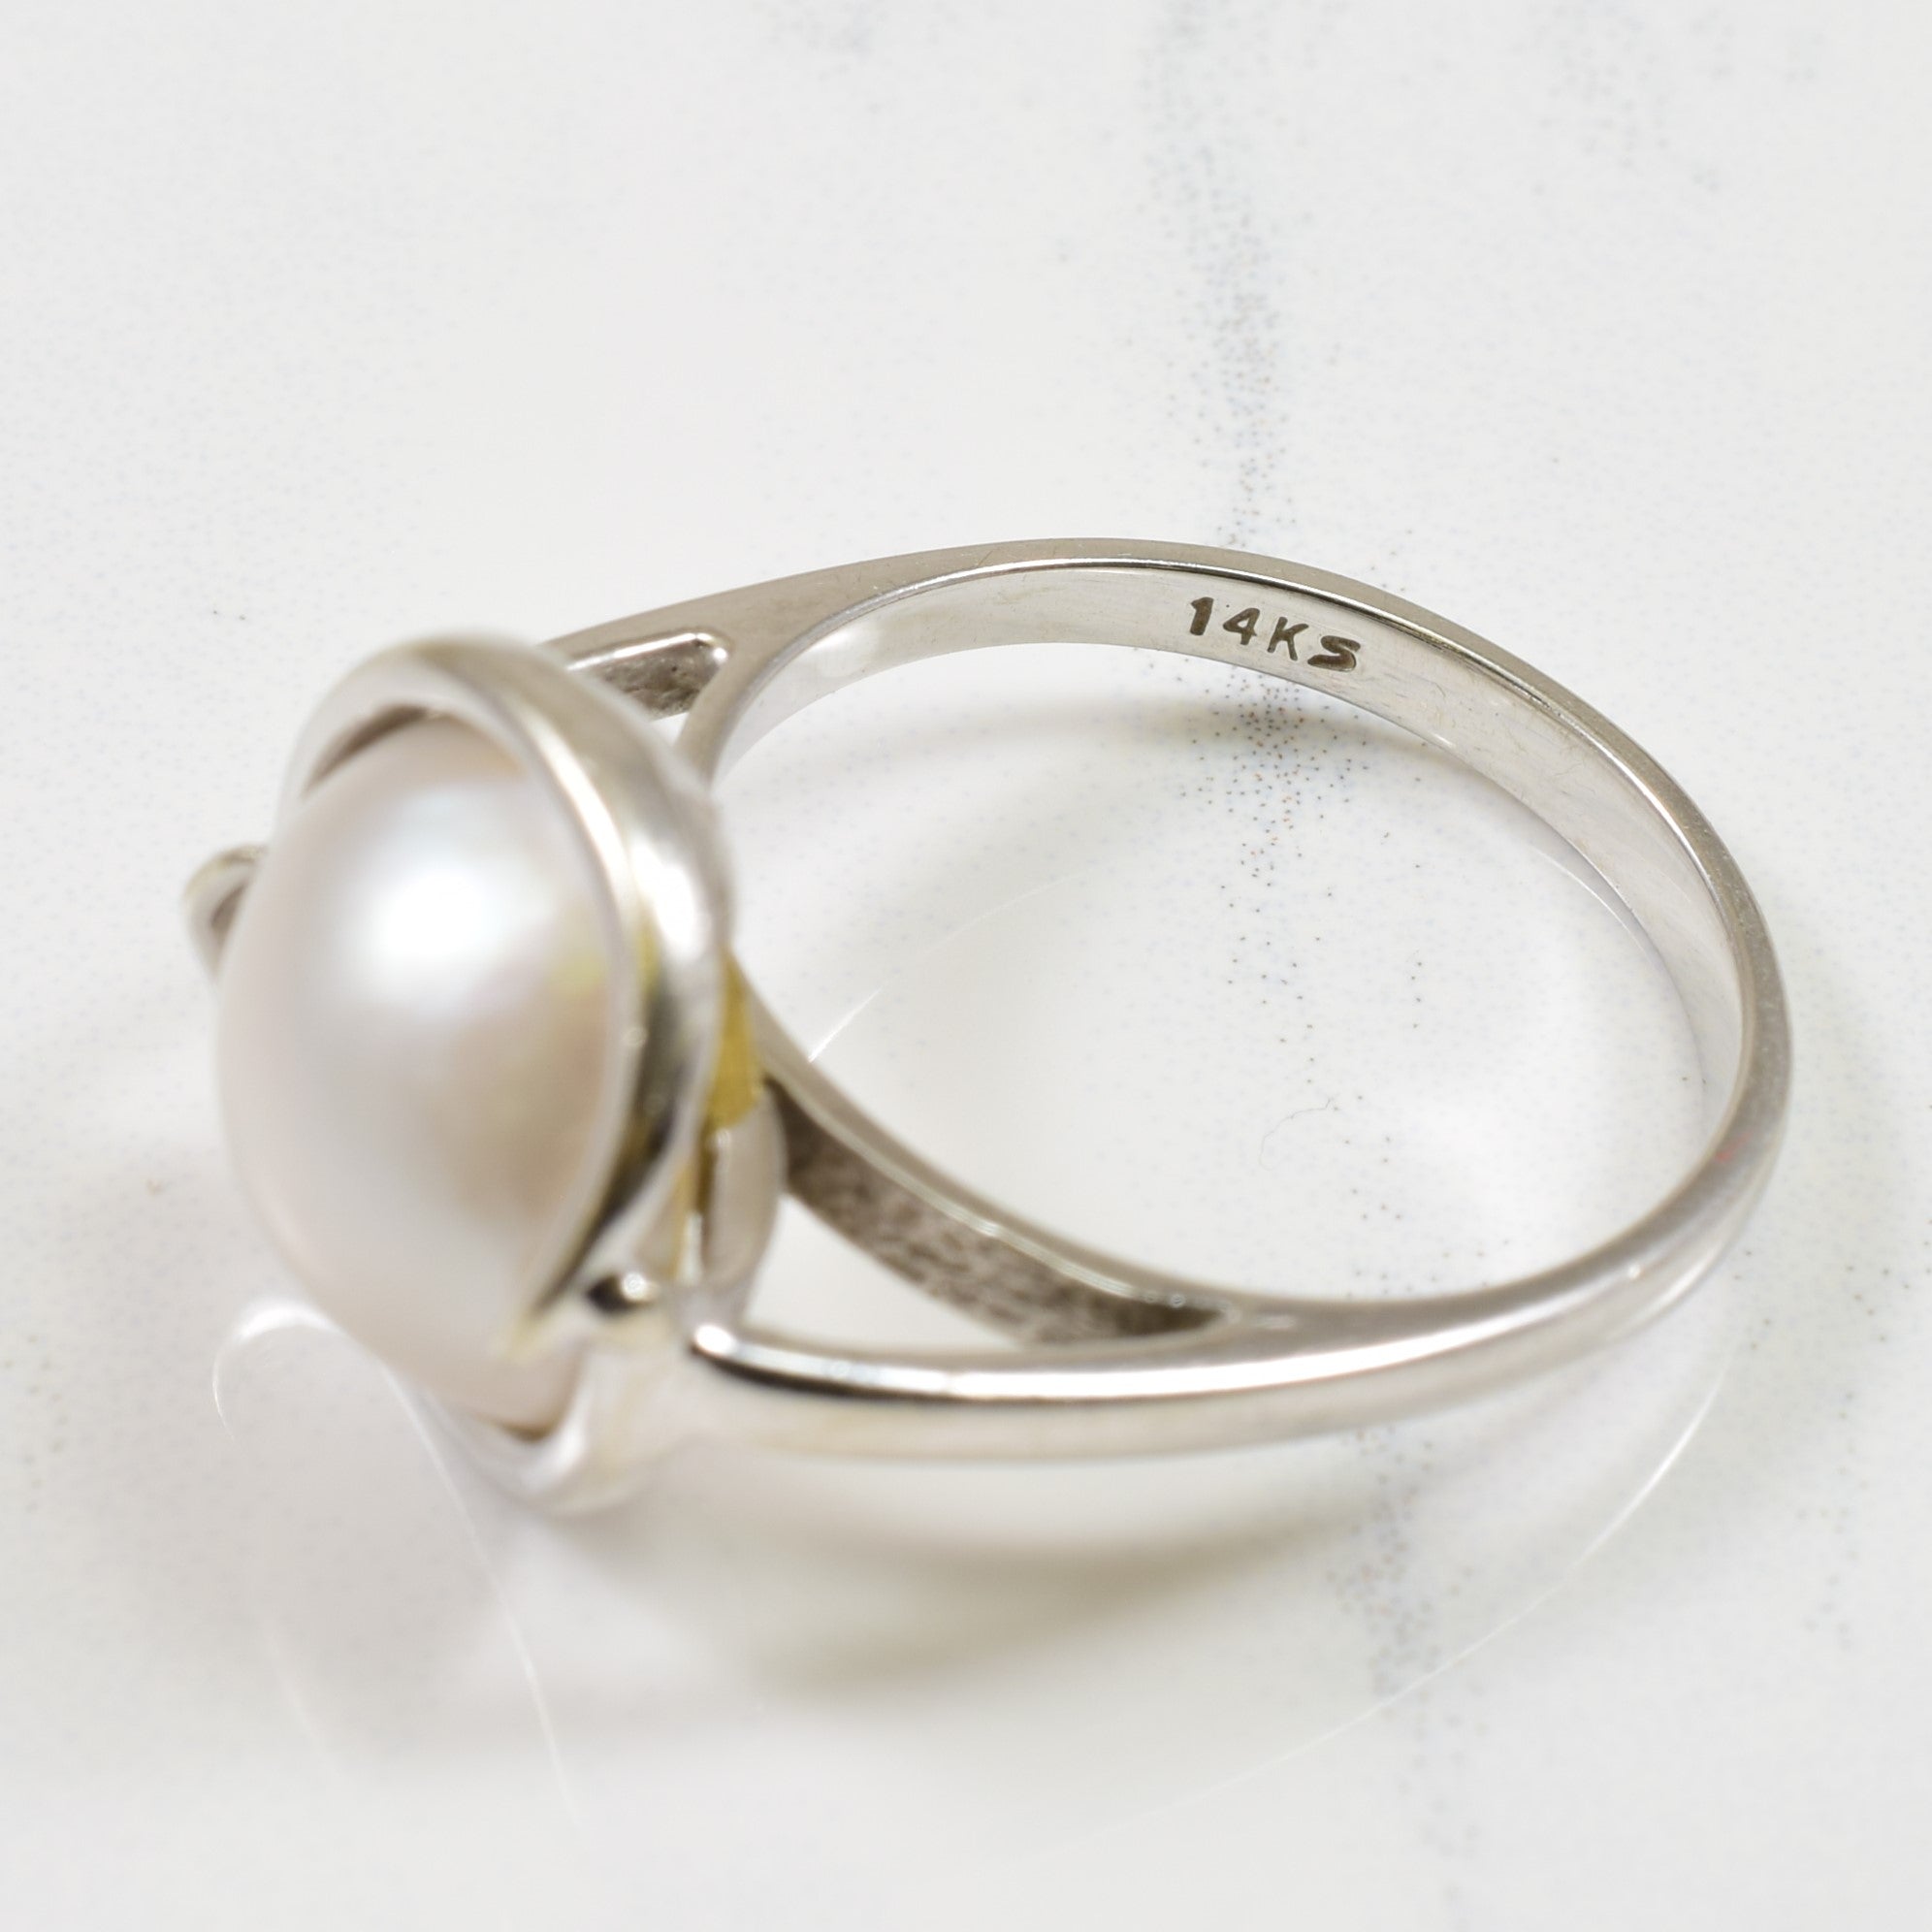 Mabe Pearl Cocktail Ring | 3.60ct | SZ 7 |